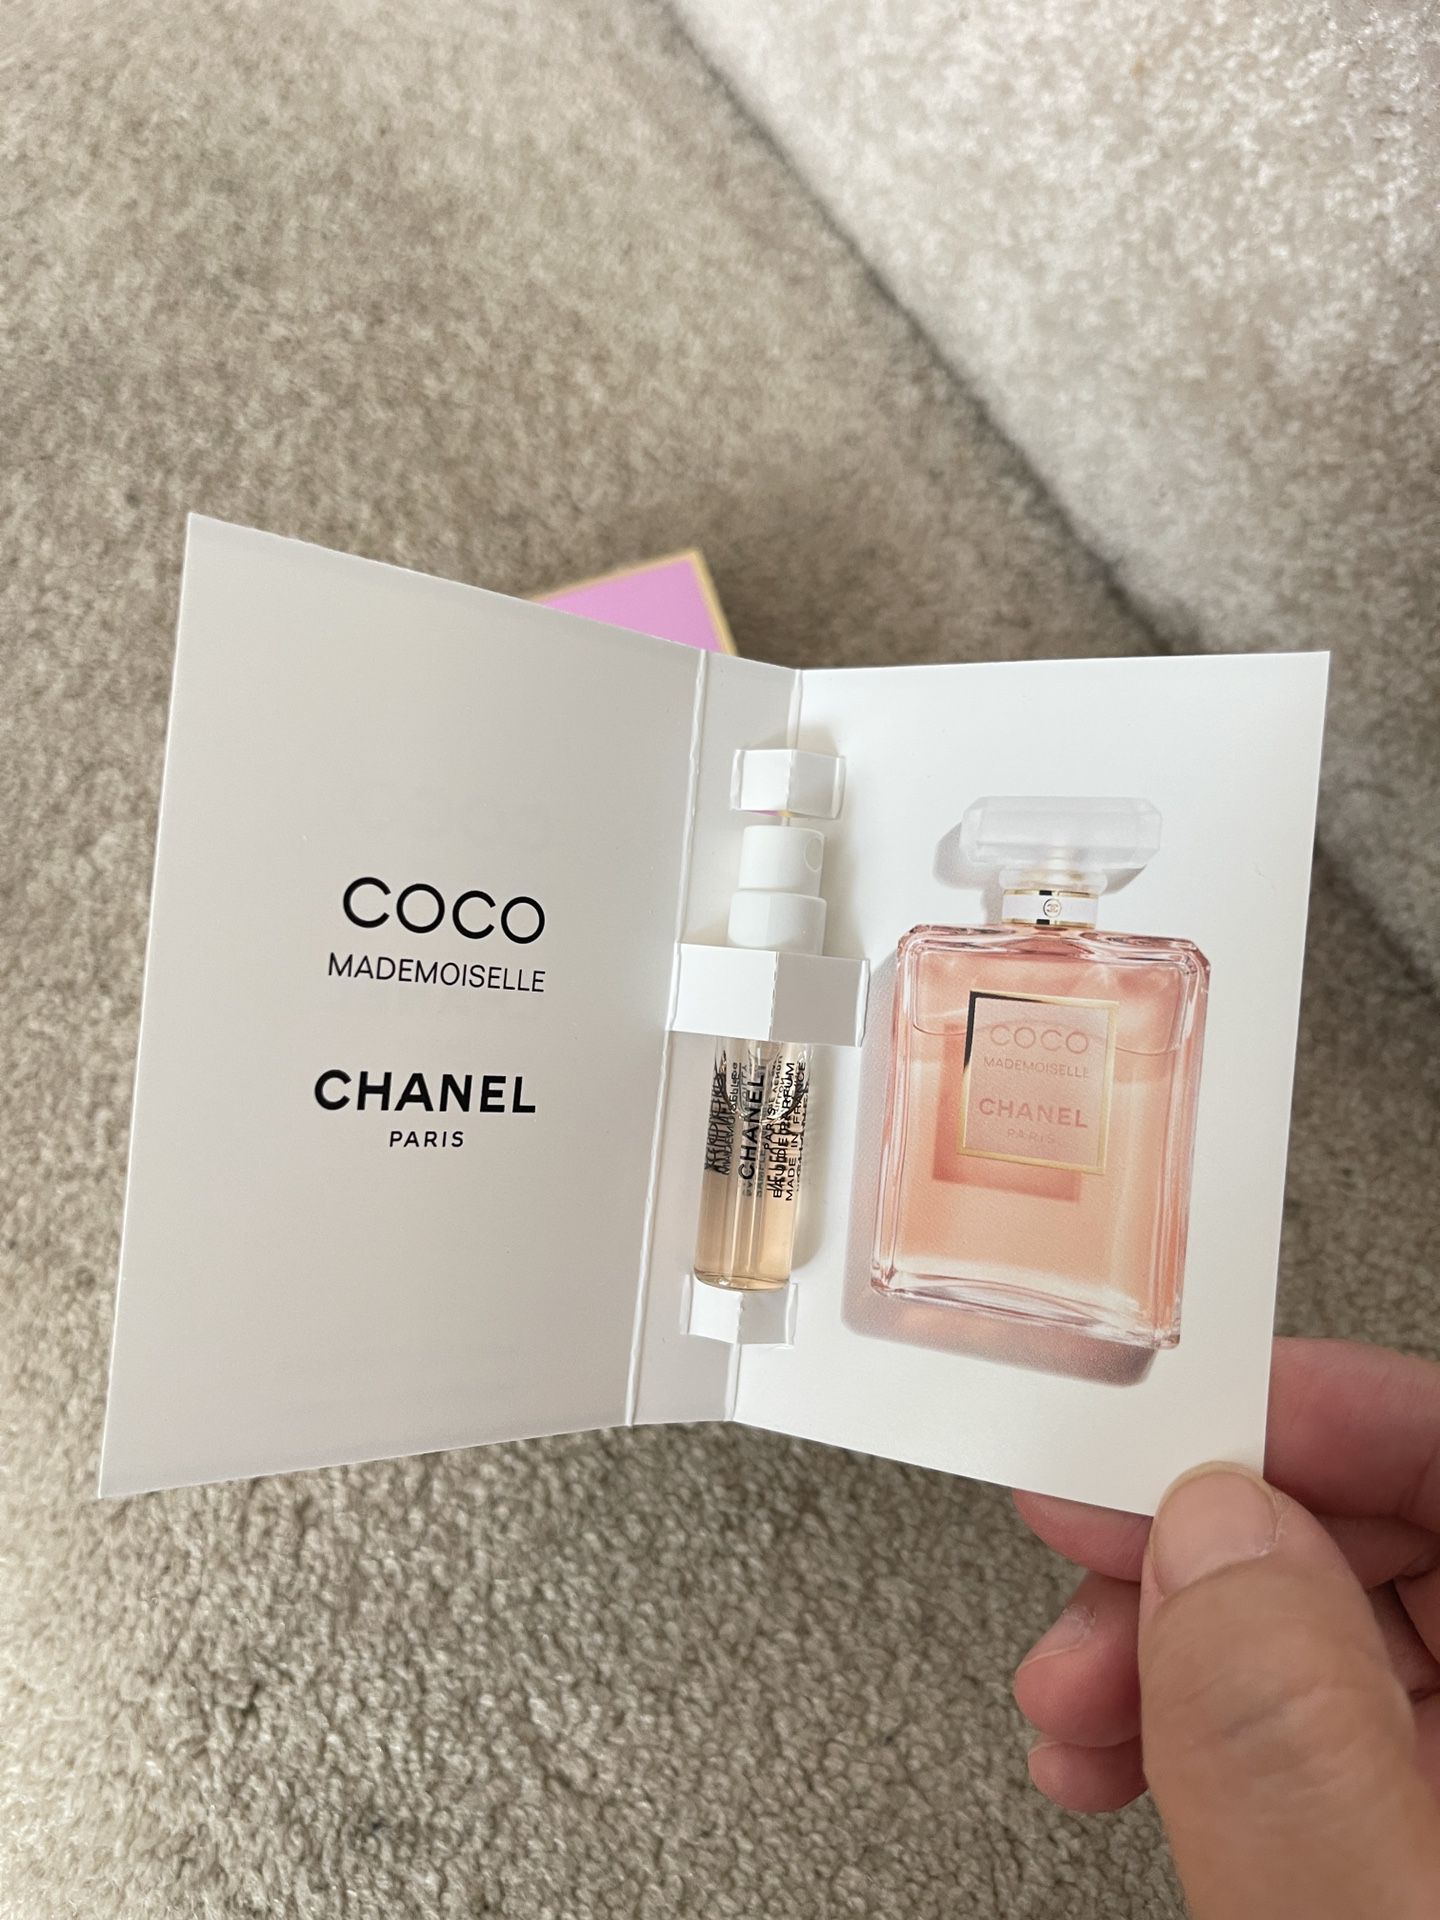 Chanel perfume set for Sale in Beaumont, TX - OfferUp